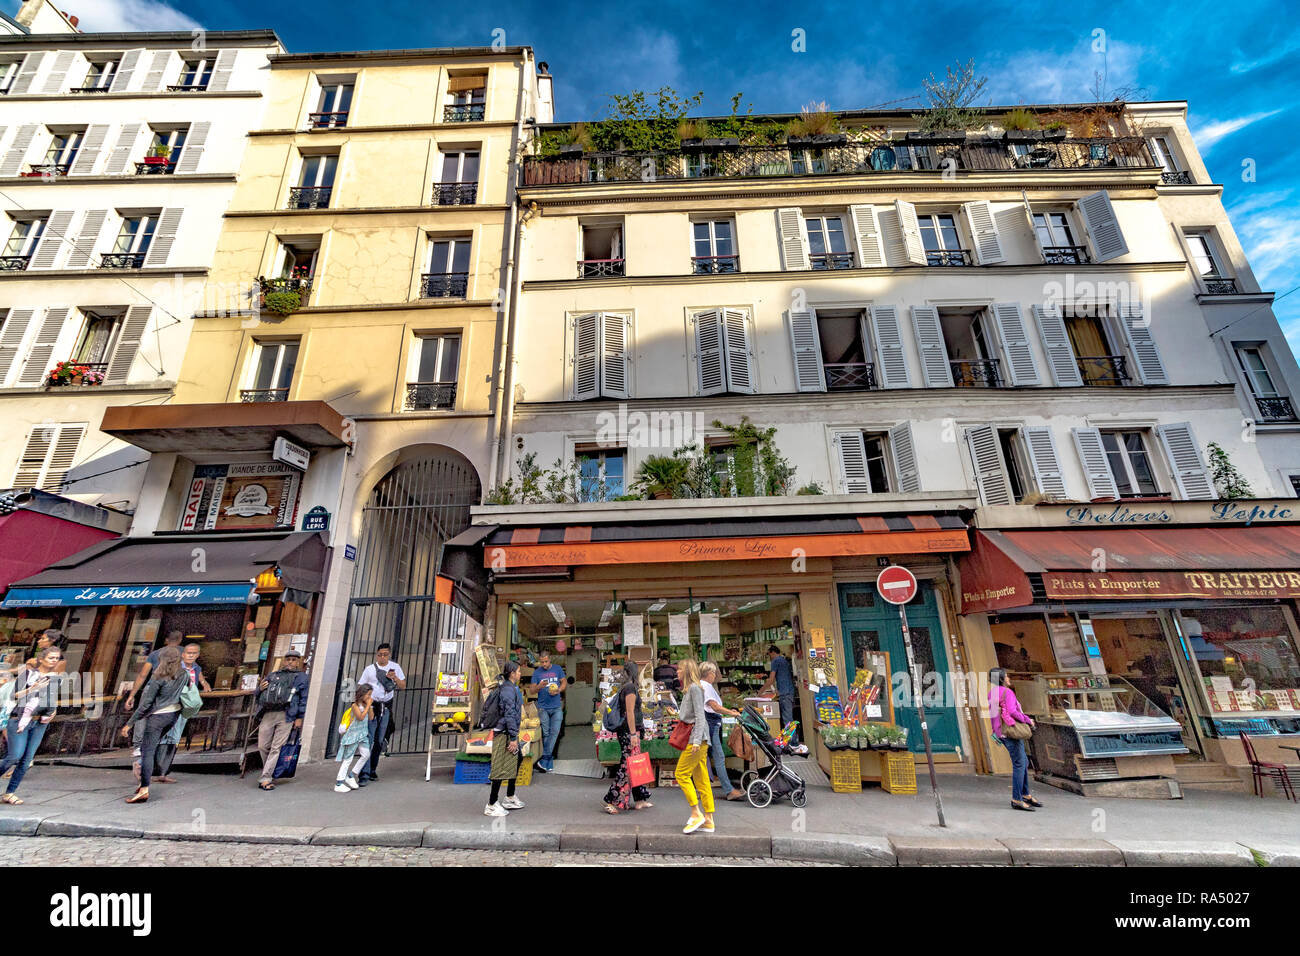 People walking past shops and apartments with shutters on the windows ,in the late afternoon summer sunshine, Rue Lepic , Montmartre ,Paris Stock Photo